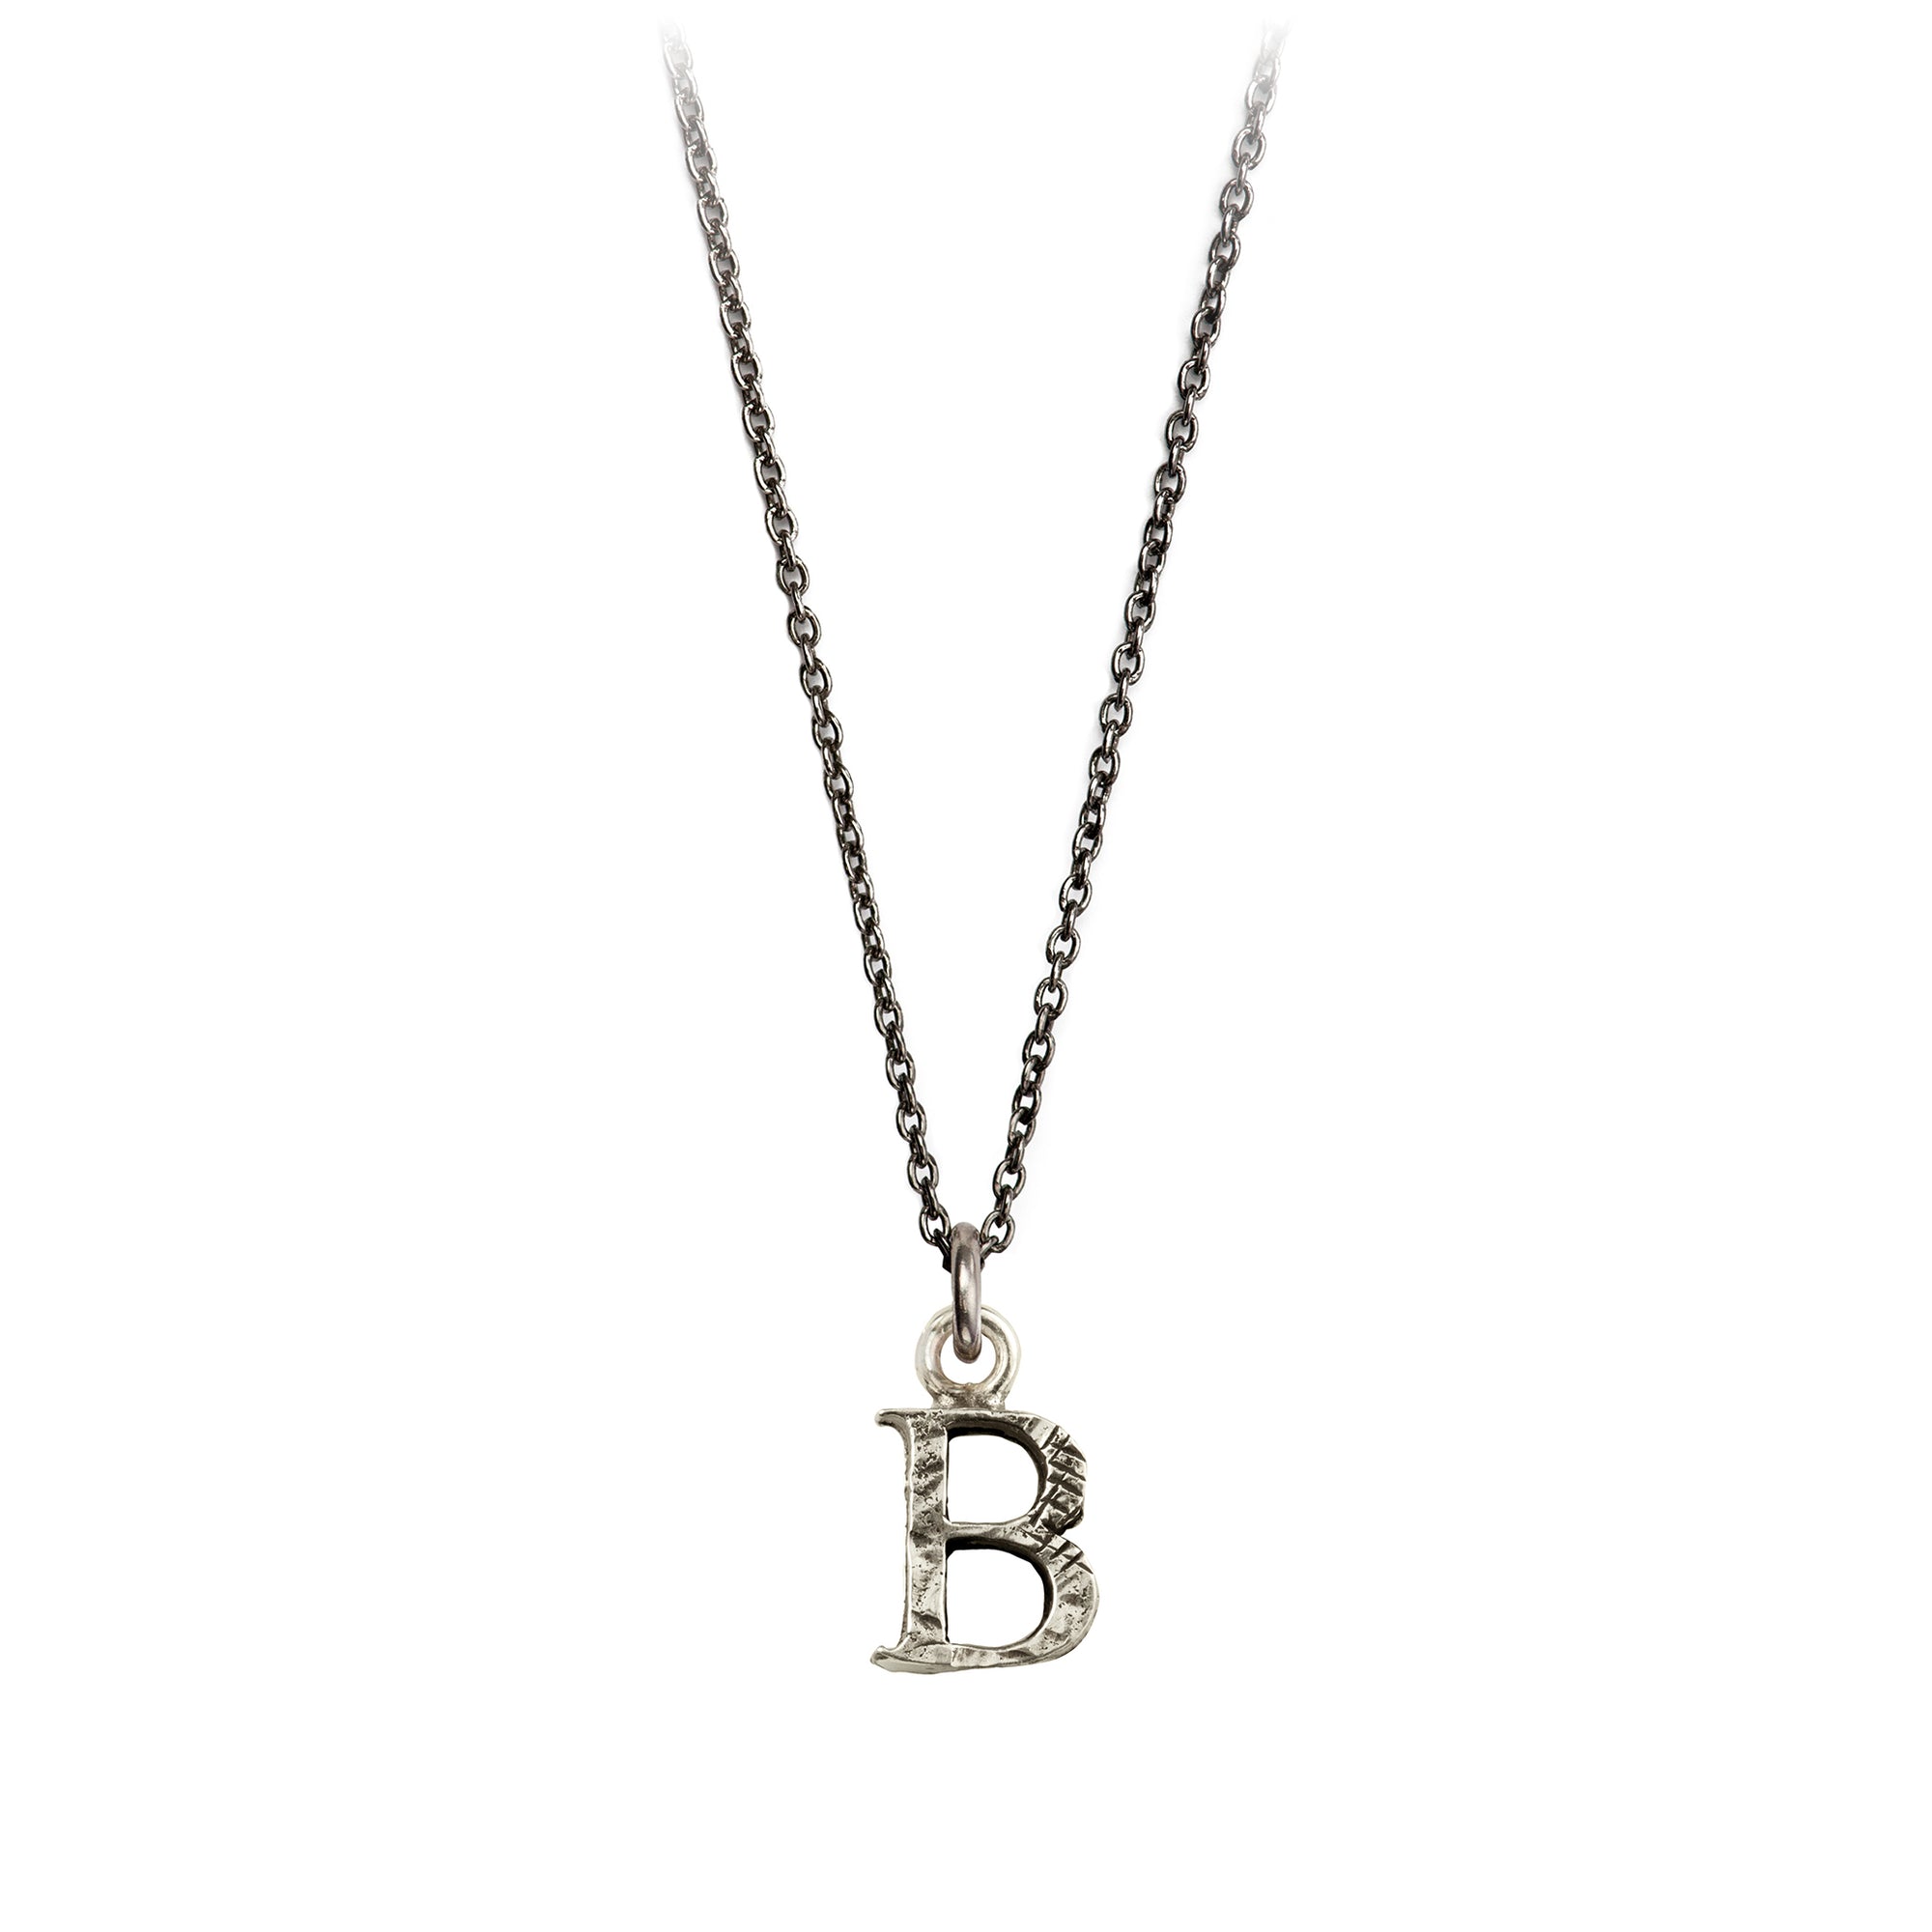 A sterling silver letter "B" charm on a silver chain.